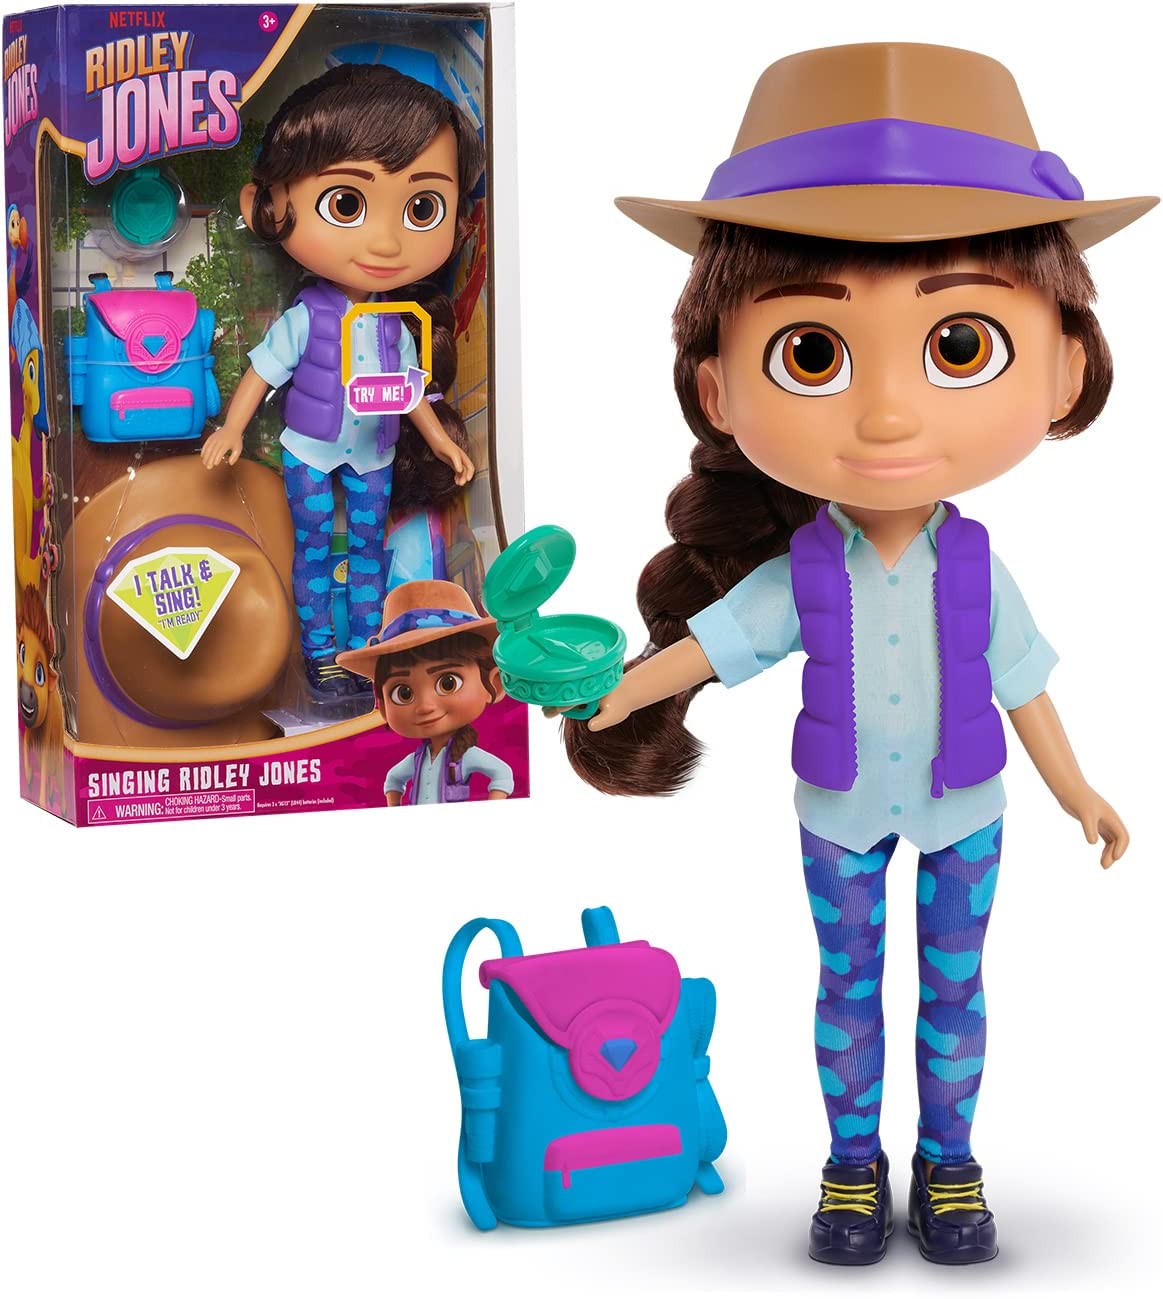 10" Just Play Netflix Ridley Jones Poseable Singing Doll w/ Removable Outfit & Accessories $10.20 + FS w/ Prime or on $25+